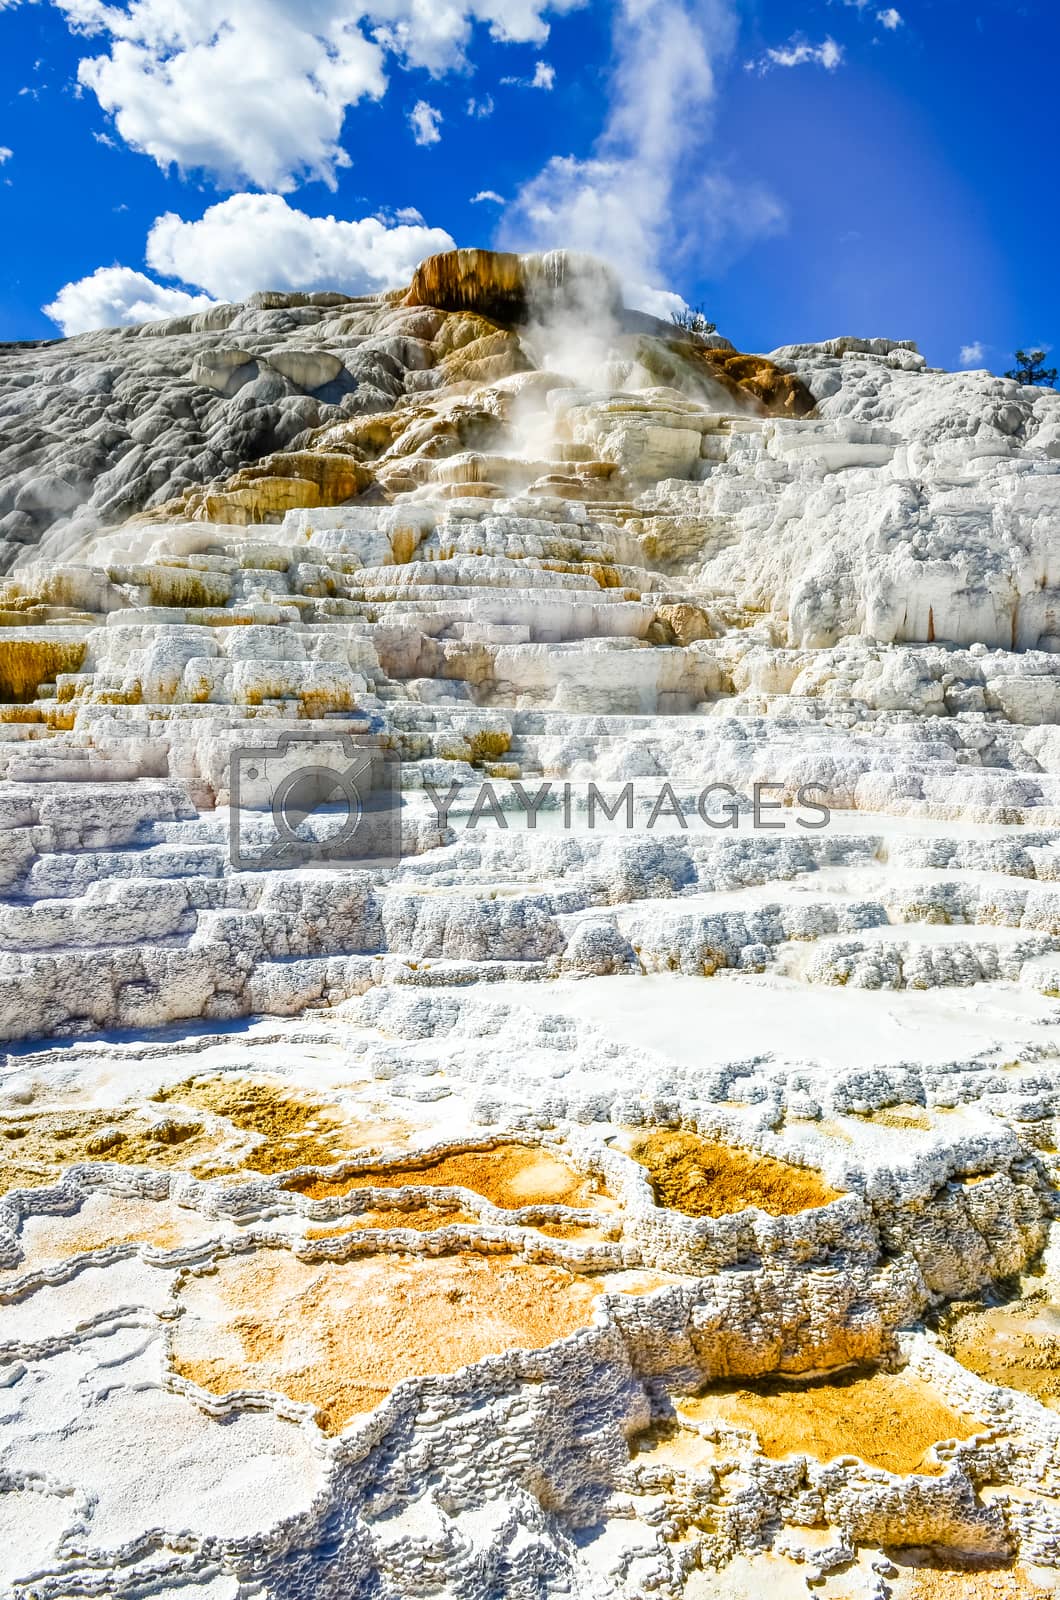 Royalty free image of Detail view of beautiful geothermal land in Yellowstone NP by martinm303